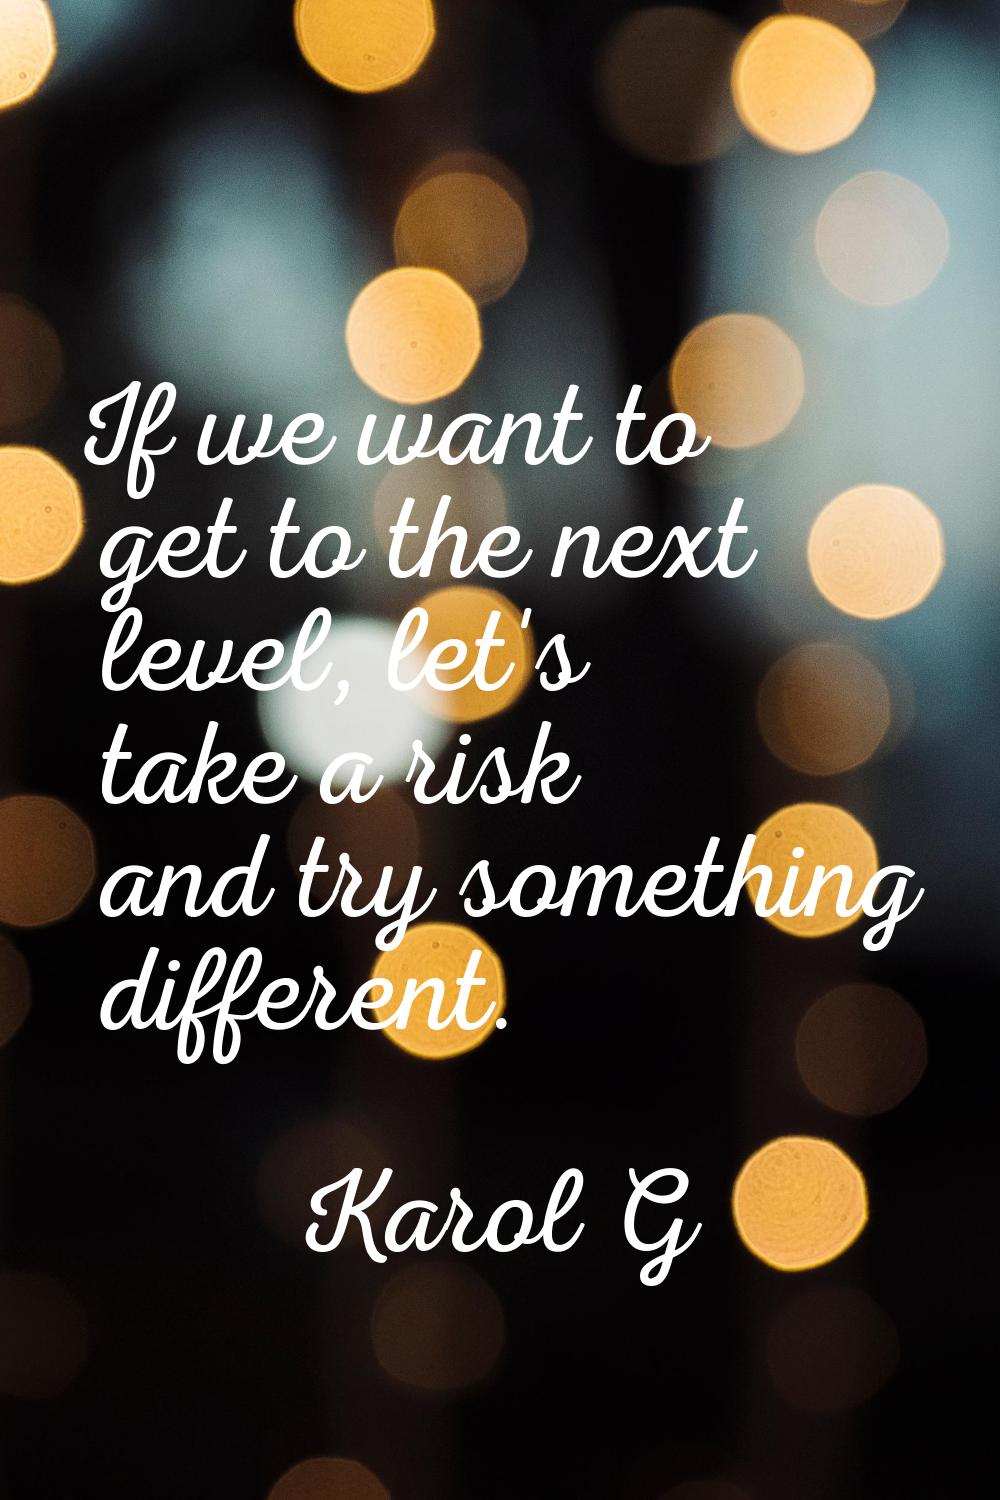 If we want to get to the next level, let's take a risk and try something different.